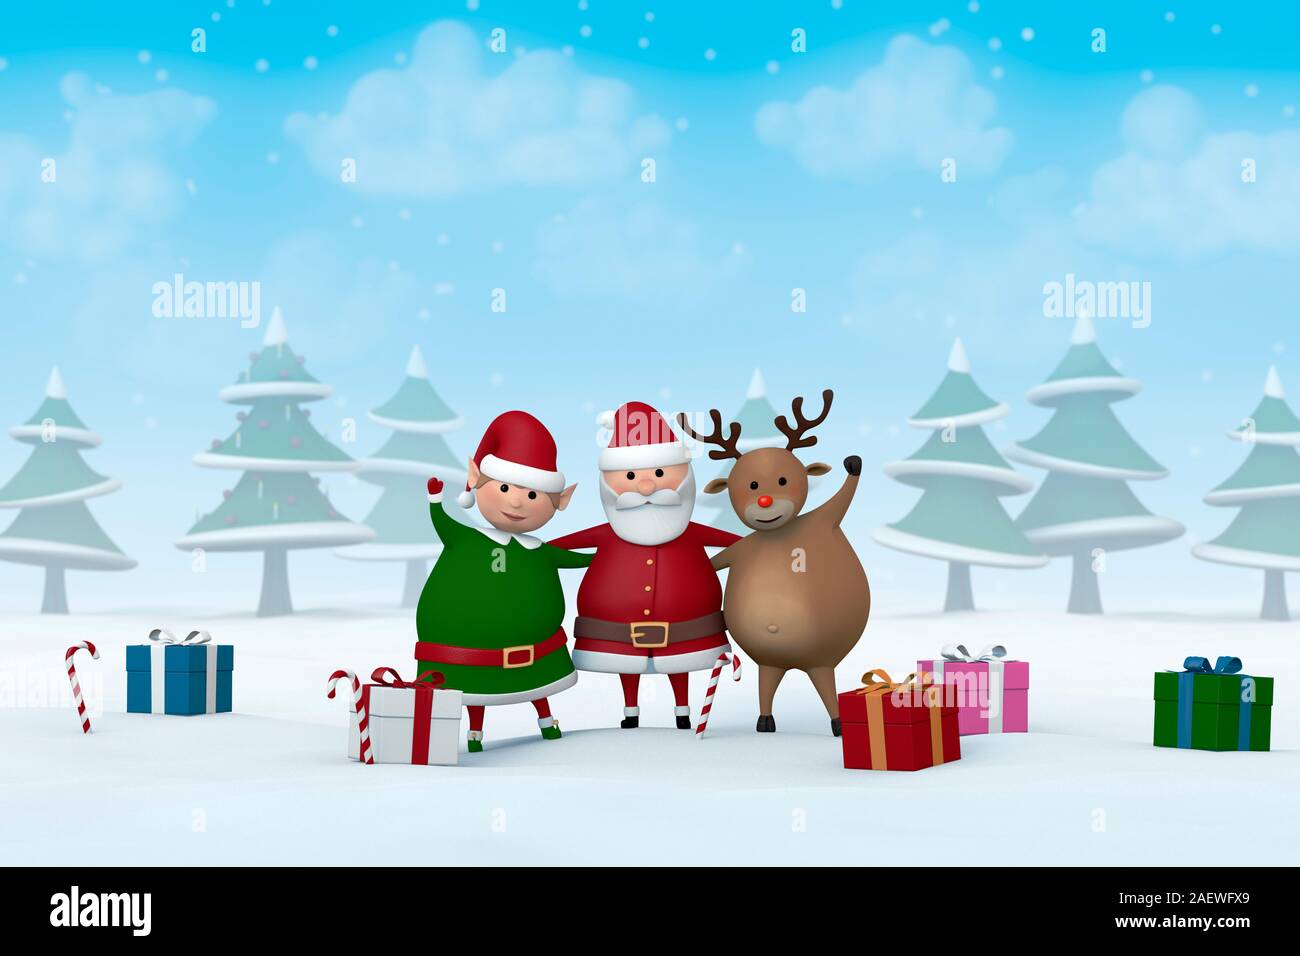 Santa Claus, a Christmas Elf and a reindeer with Christmas gifts in a snowy winter landscape. Stock Photo